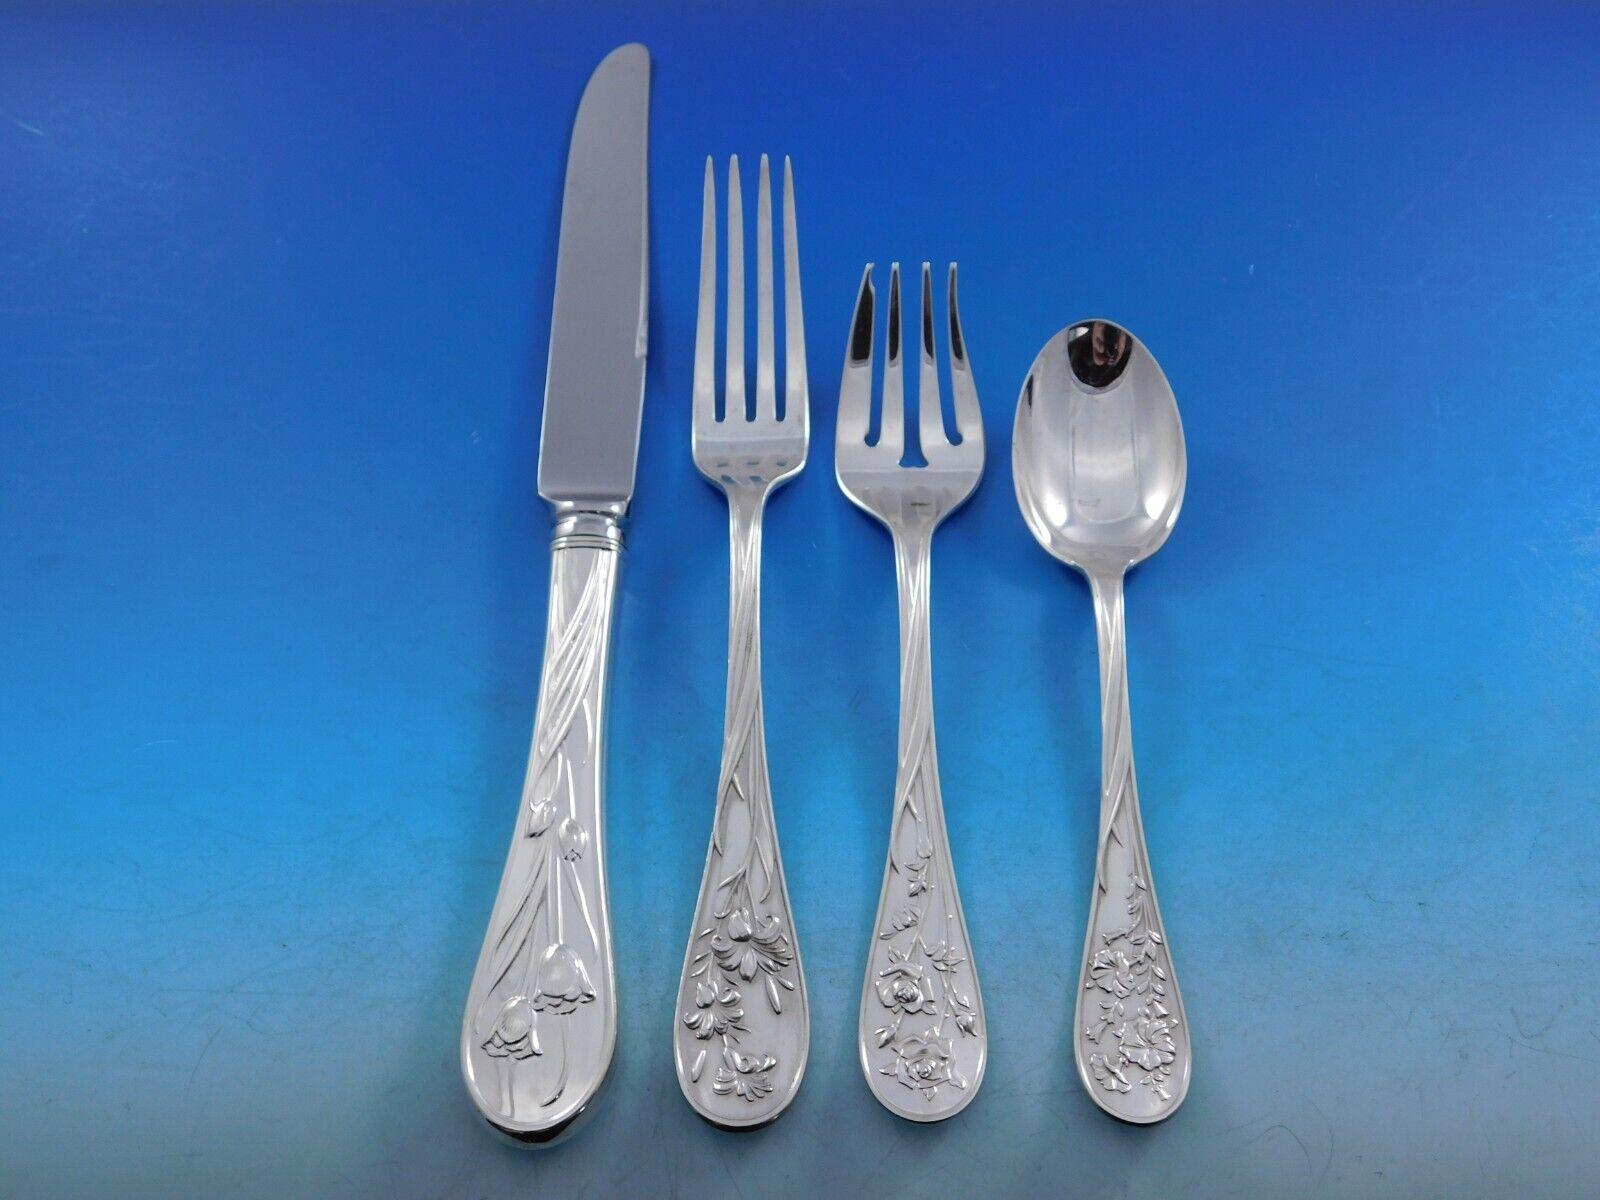 Displaying a gleaming finish, Quintessence by Lunt has a beautiful teardrop profile with different, intricate flower motifs on each piece. Pieces are heavy and well balanced.
Scarce multi-motif floral Quintessence by Lunt sterling silver Flatware